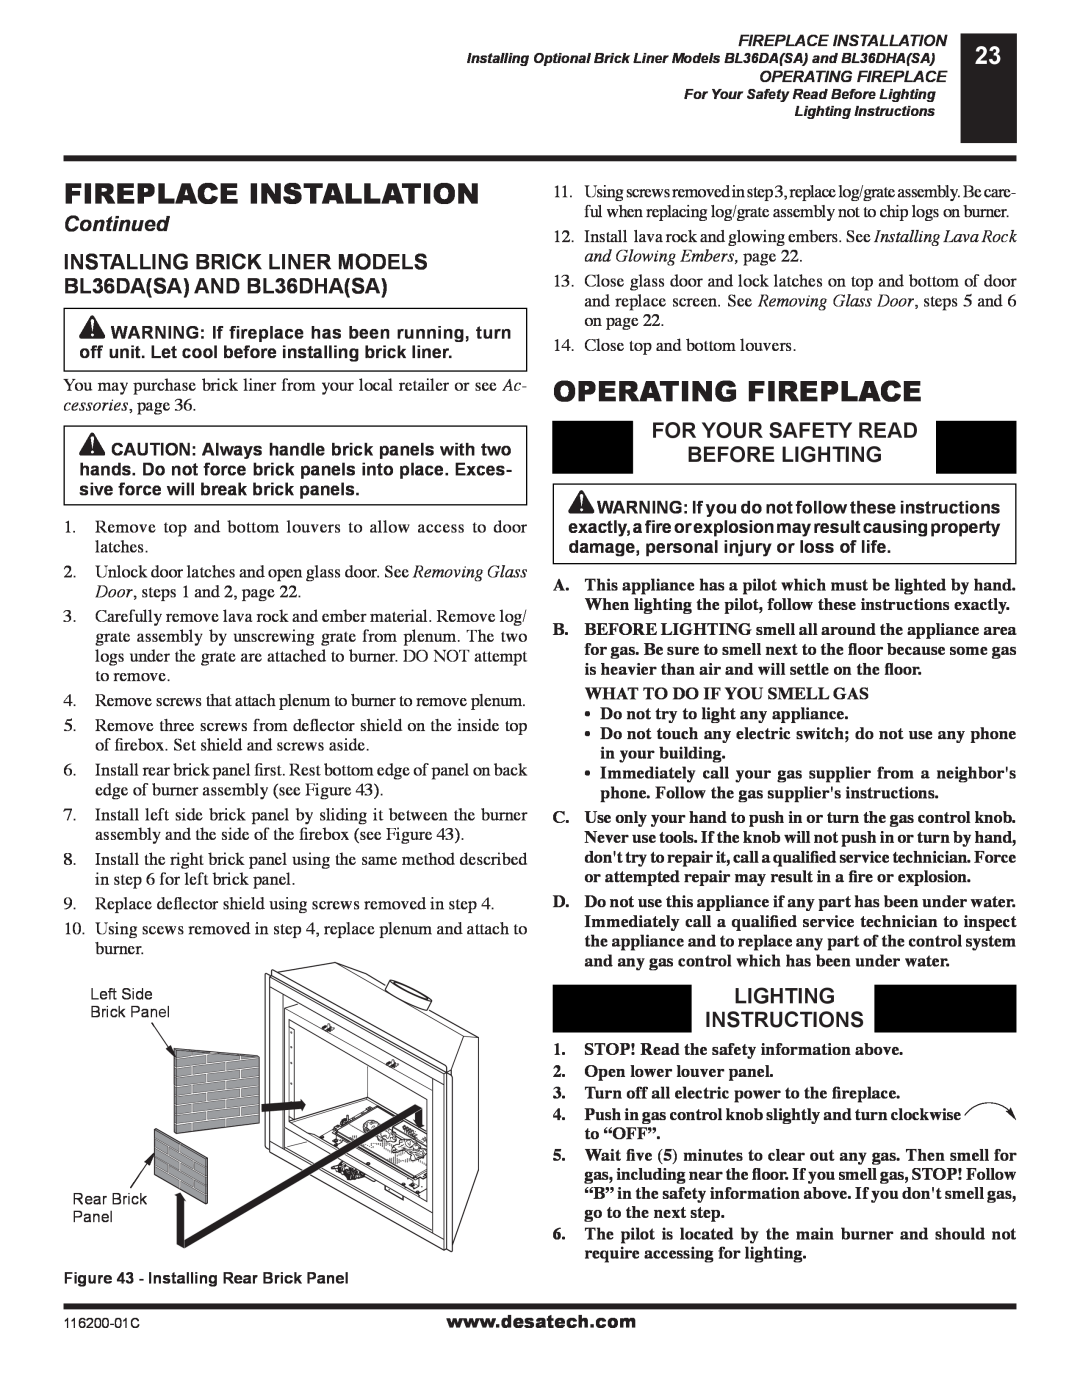 Desa VC36N, VC36P, CGCDV36NR, CGCDV36PR Operating Fireplace, For Your Safety Read Before Lighting, Lighting Instructions 